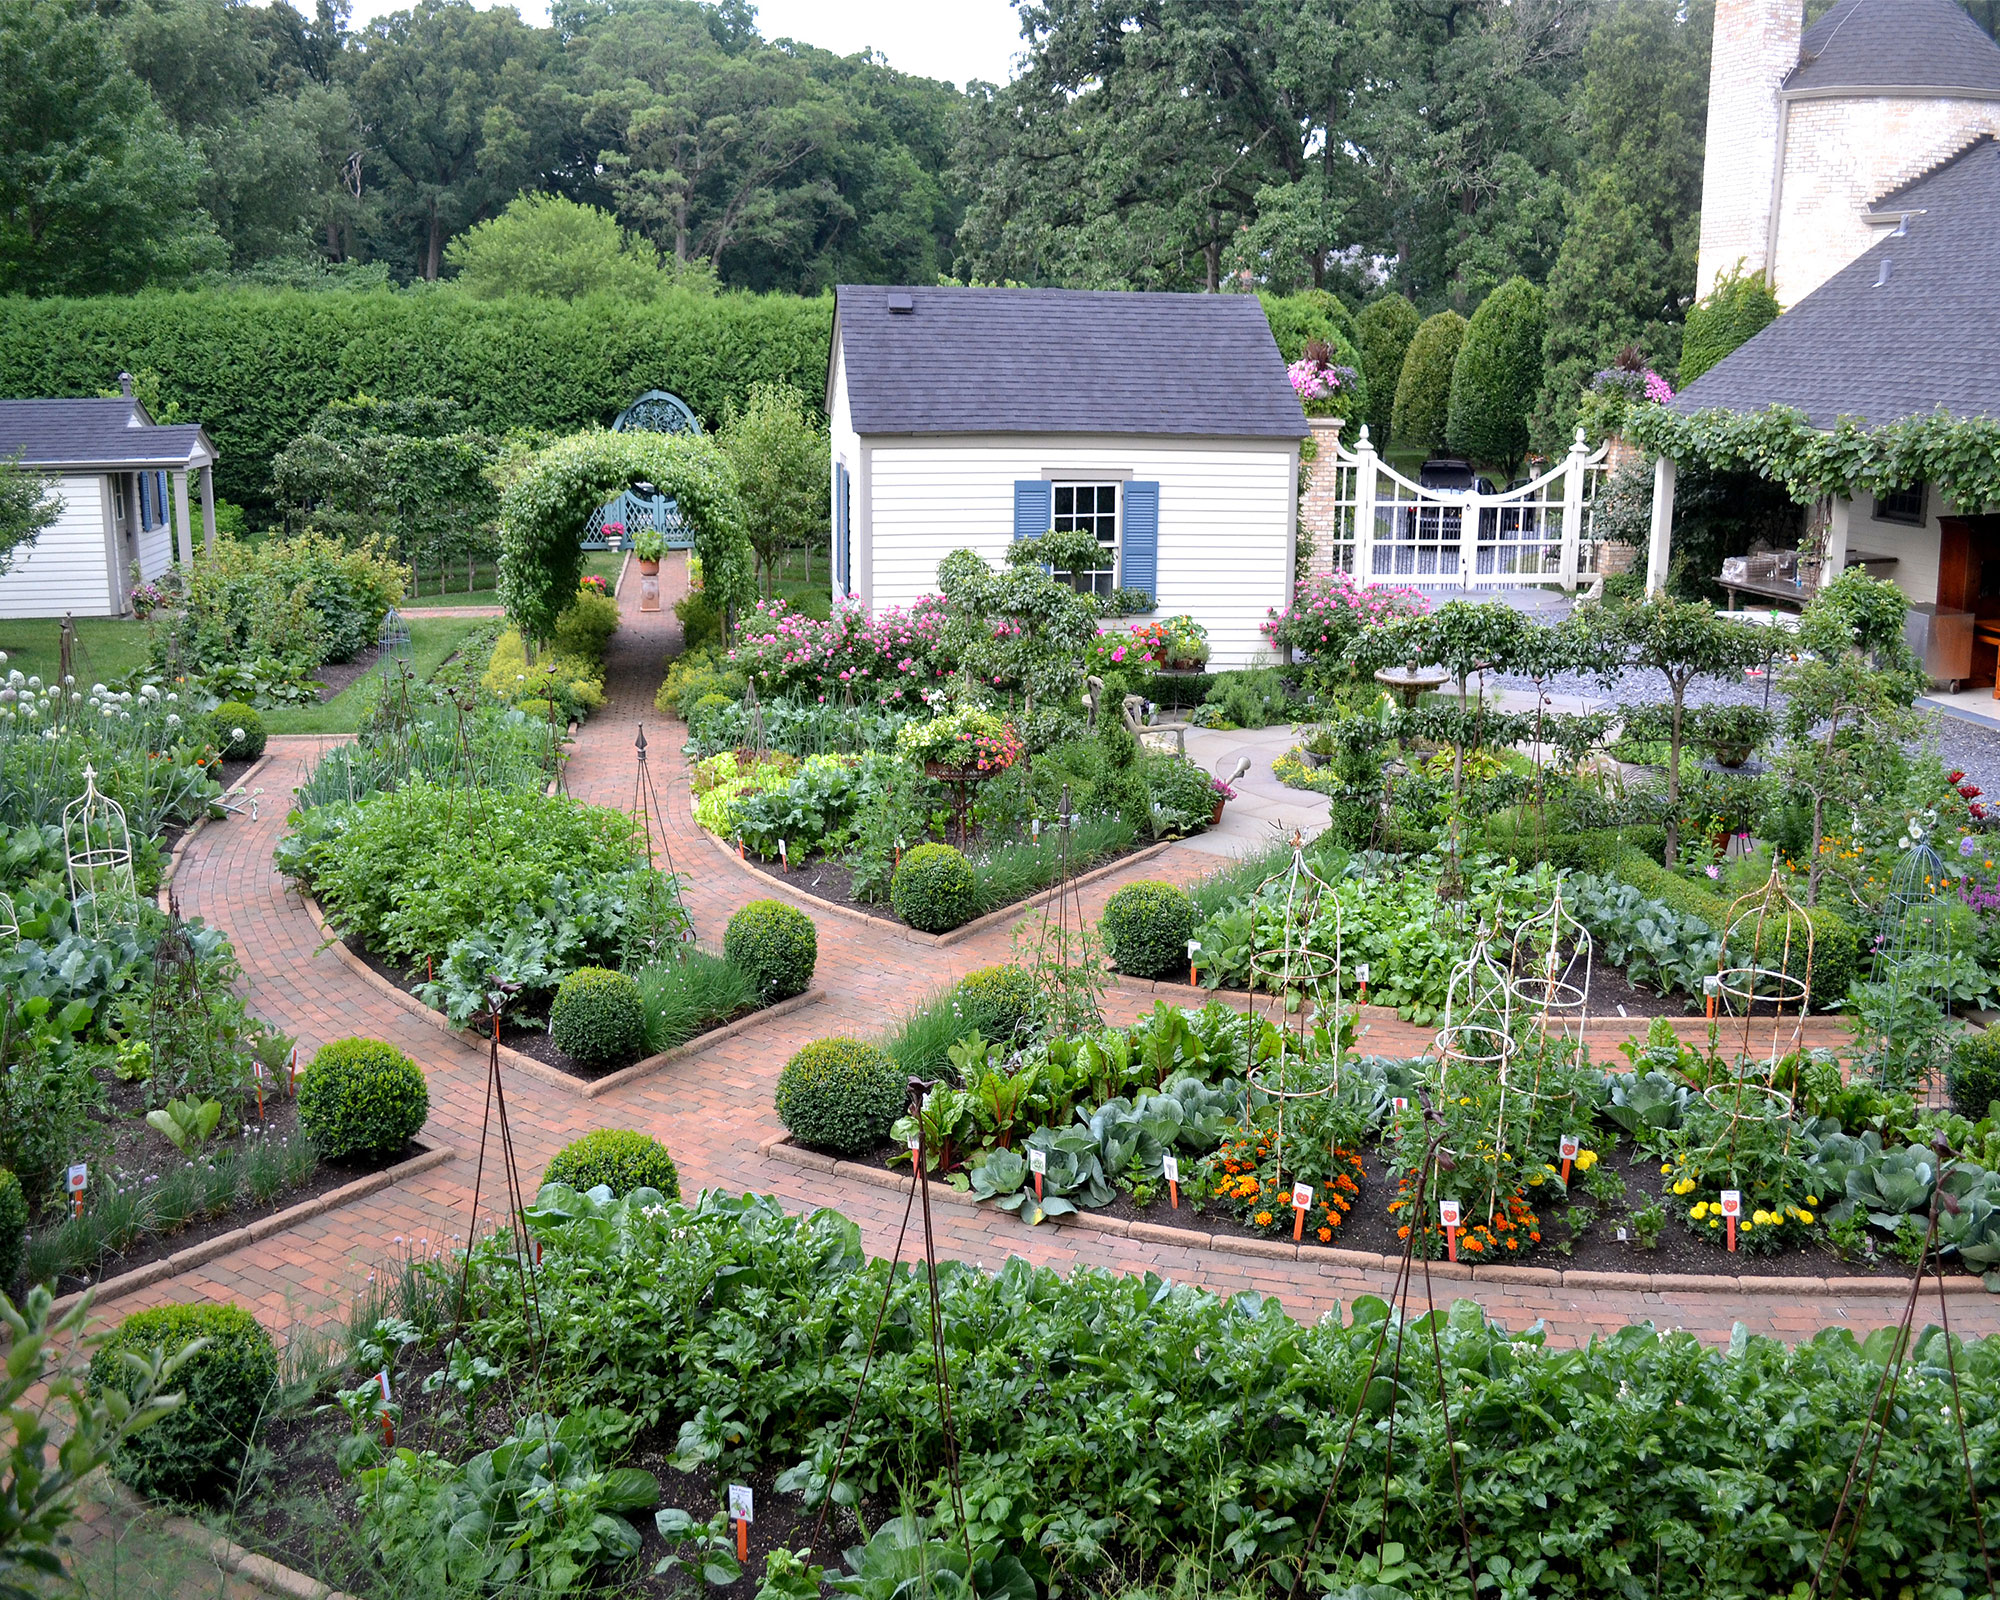 front yard designed as a traditional potager garden for growing fruit and vegetables